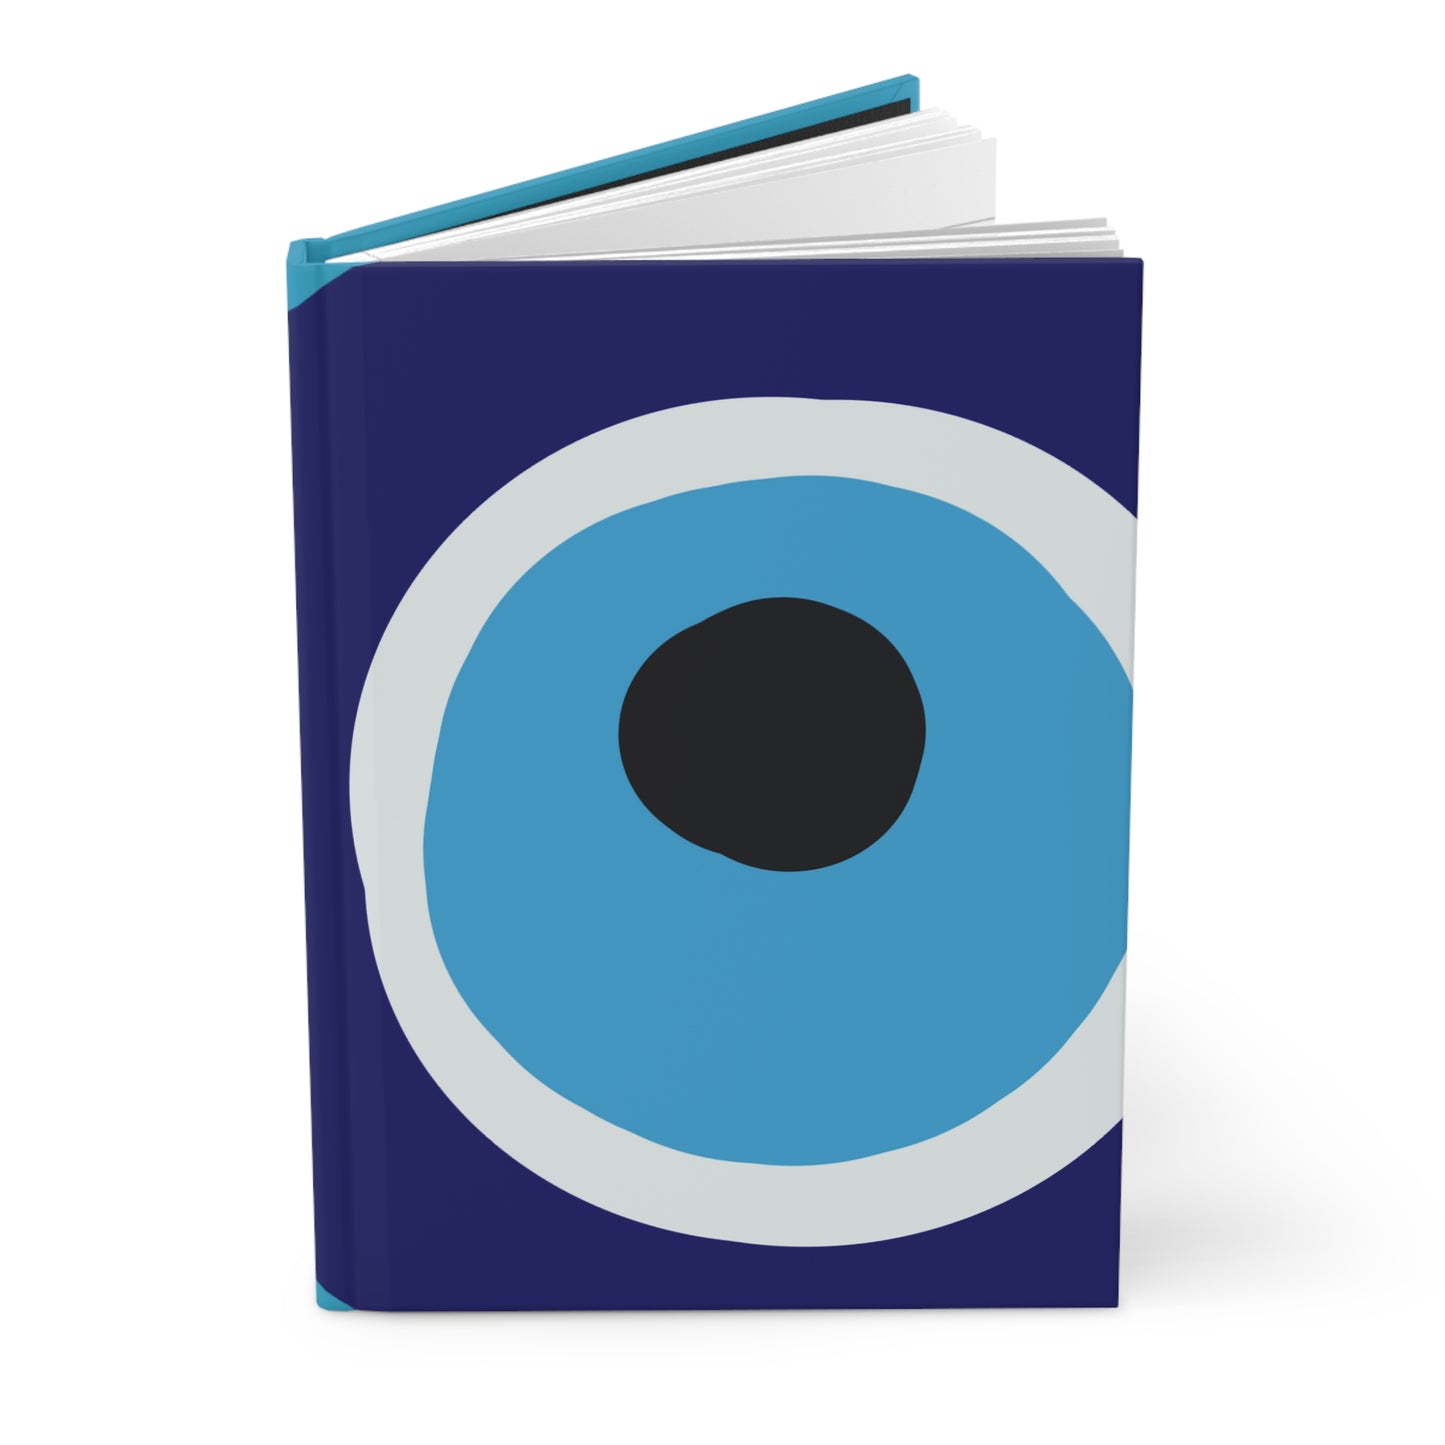 Evil Eye | Blank Hardcover Book of Shadows | Grimoire for Witches, Pagans, Wiccans